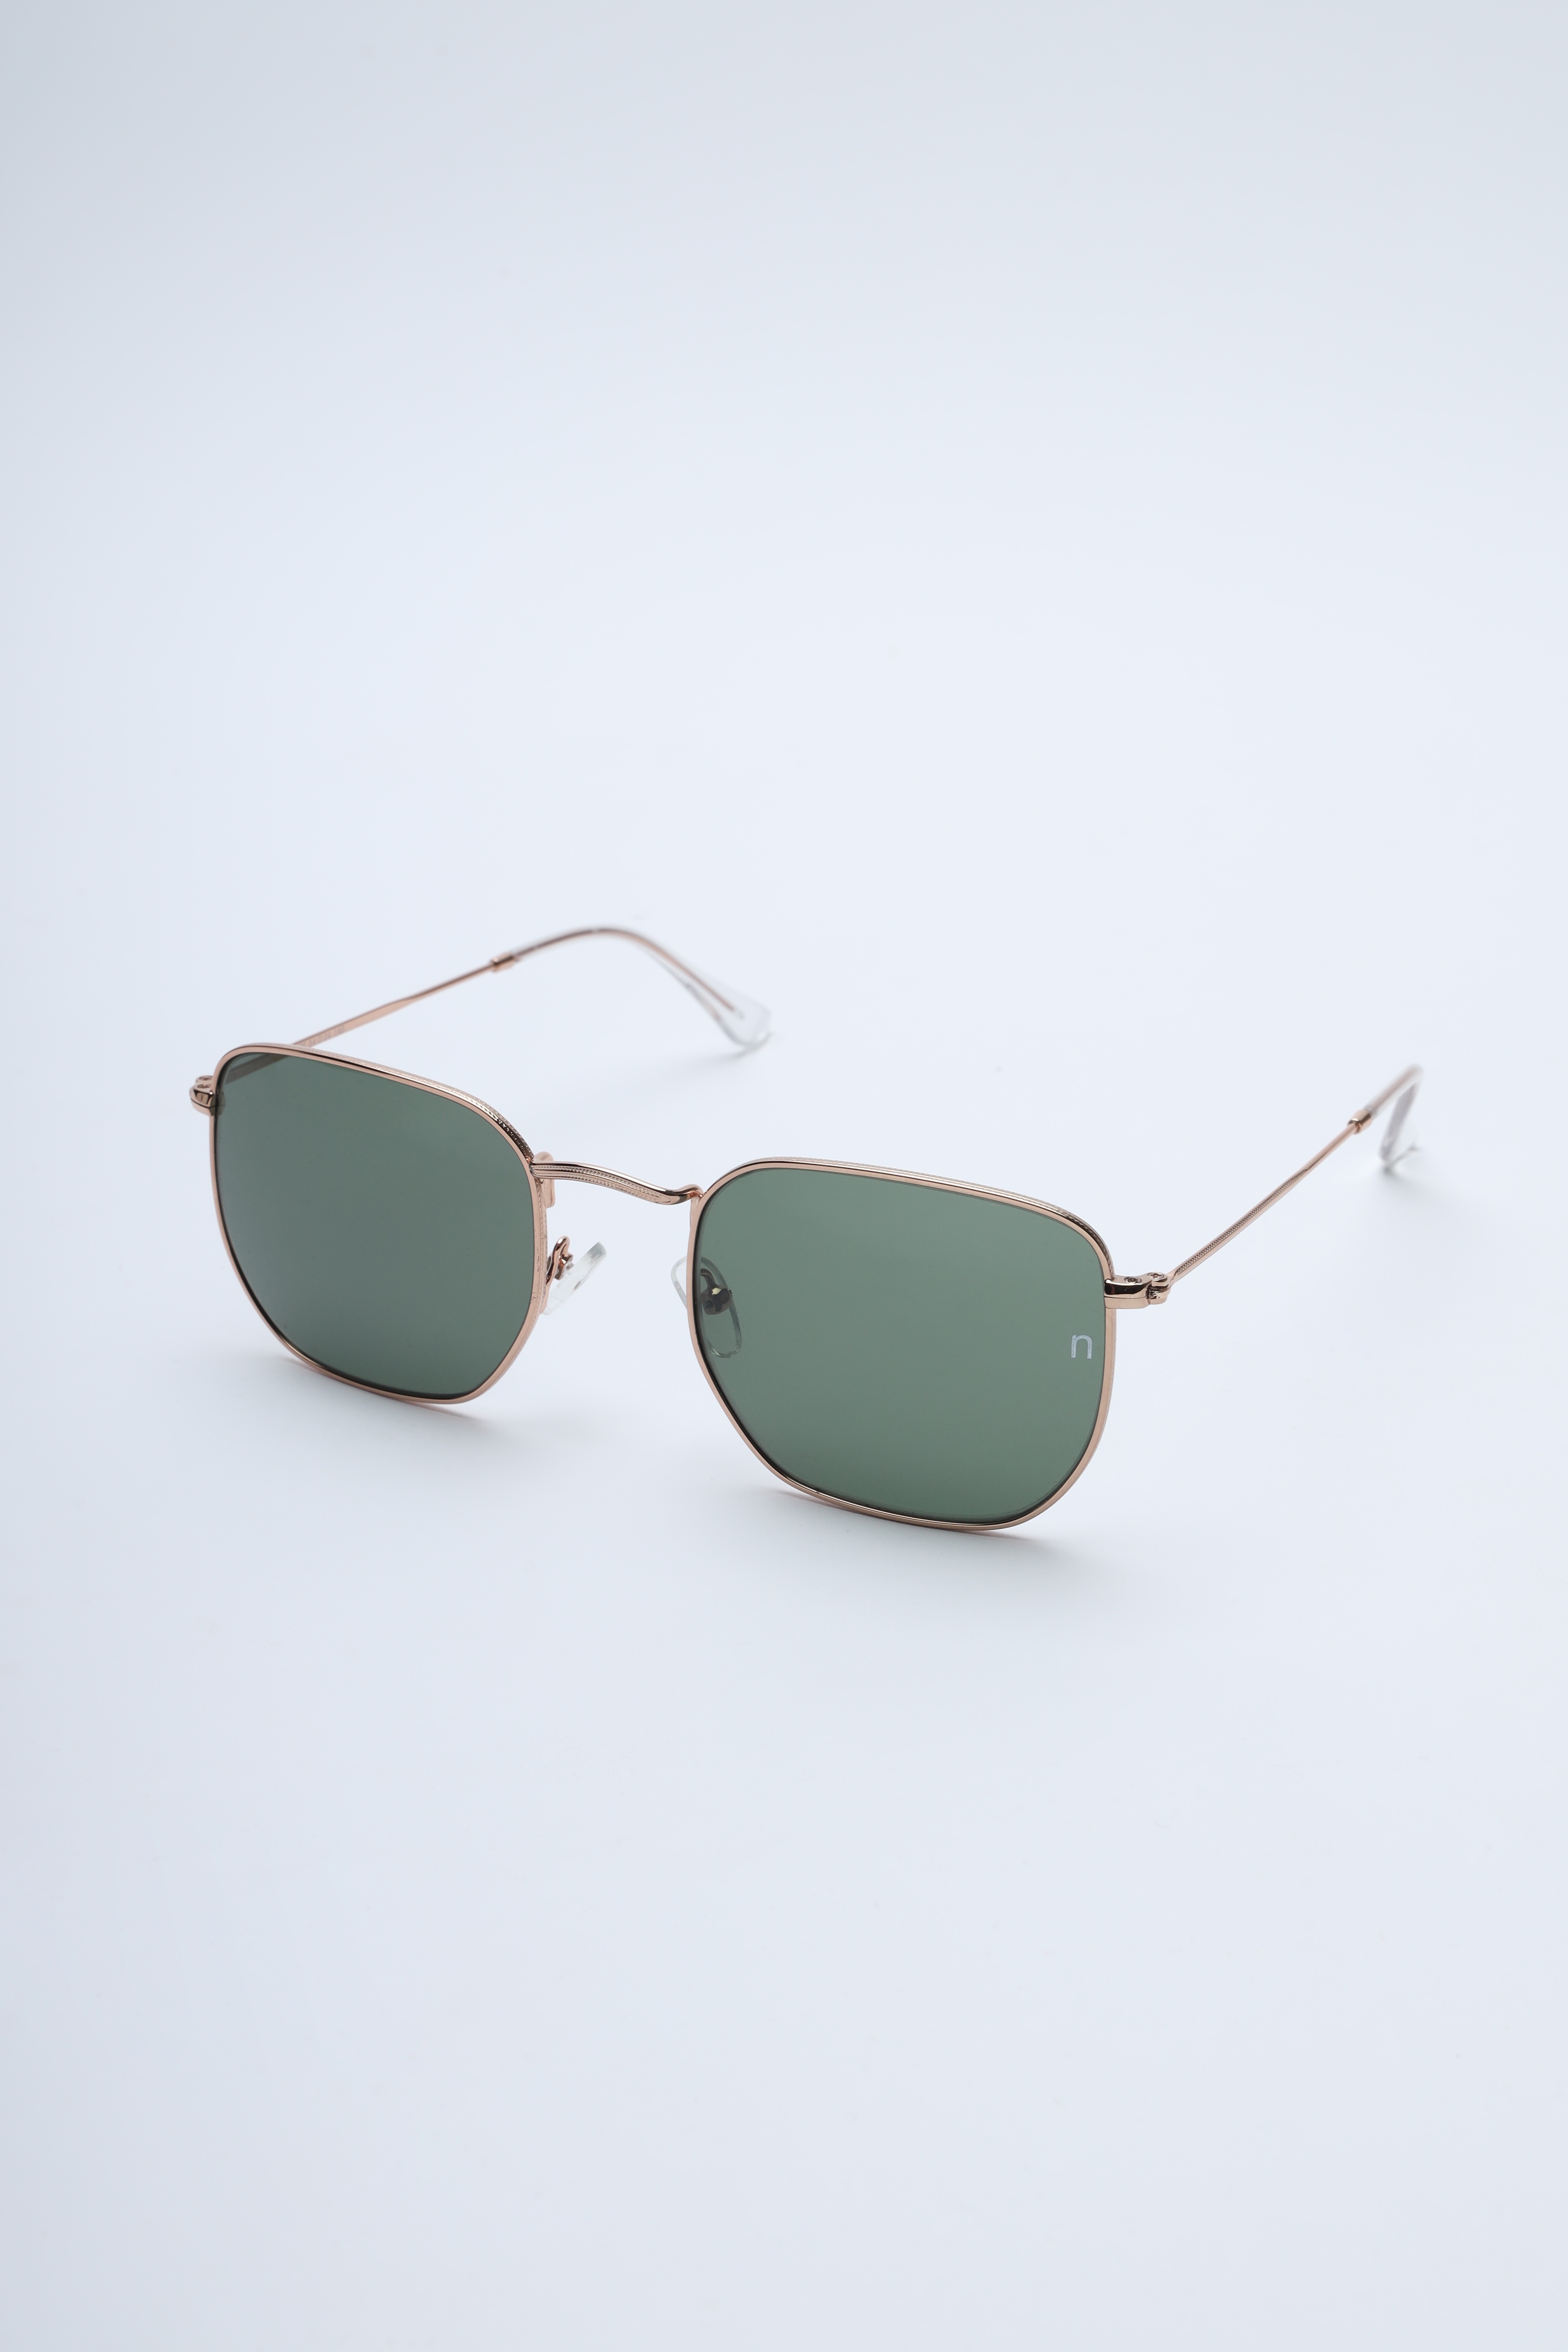 Noggah | Noggah Stainless Steel Gold Frame with Green Glass UV Protection Lens  Large Size Unisex Sunglasses  0